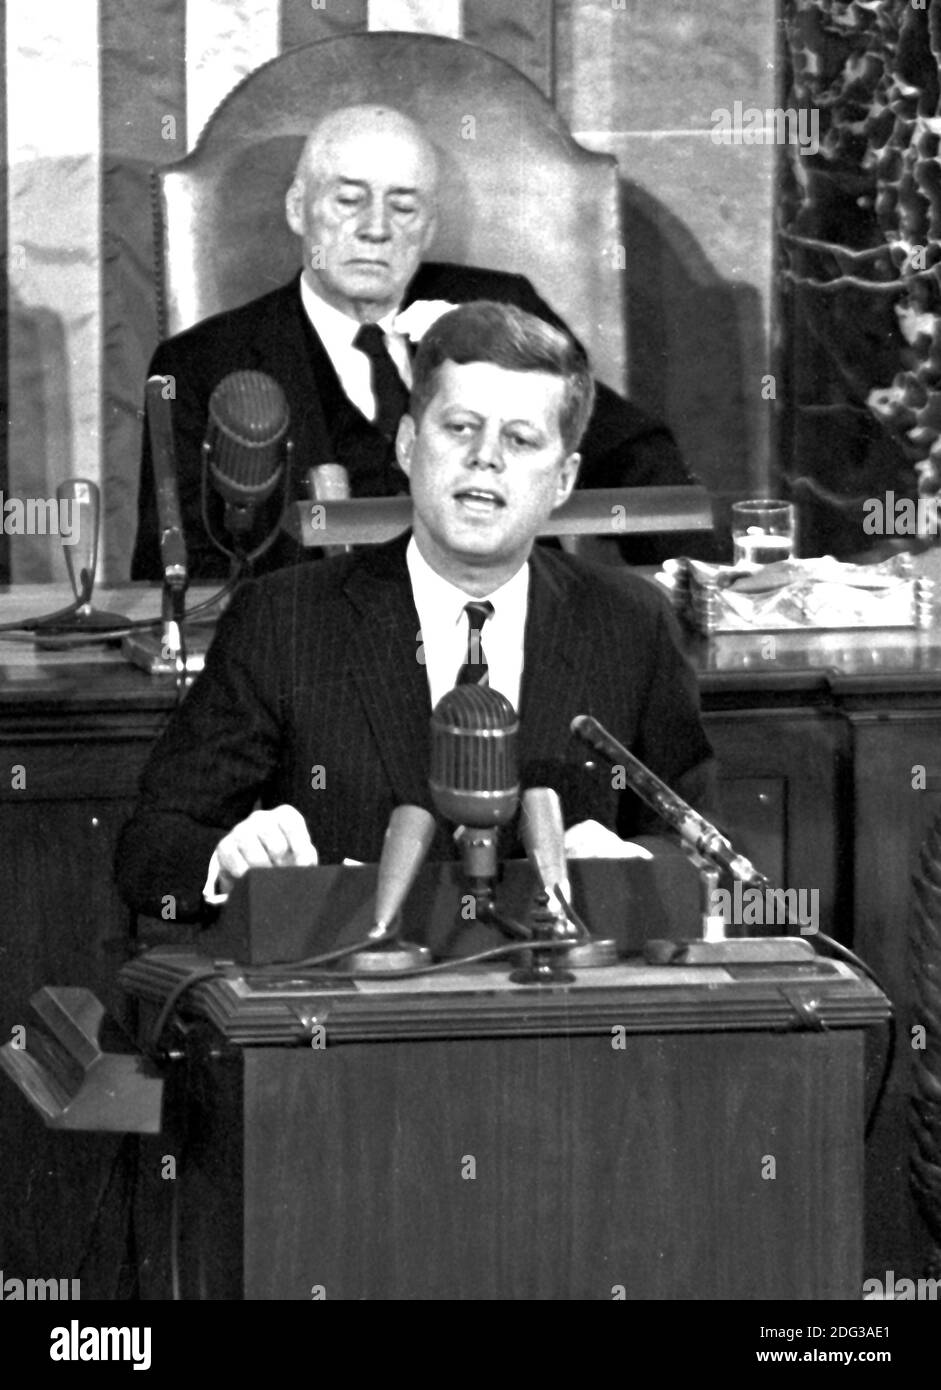 United States President John F. Kennedy outlined his vision for manned exploration of space to a Joint Session of the United States Congress, in Washington, DC, USA, on May 25, 1961 when he declared, "...I believe this nation should commit itself to achieving the goal, before this decade is out, of landing a man on the Moon and returning him safely to the Earth." This goal was achieved when astronaut Neil A. Armstrong became the first human to set foot upon the Moon at 10:56 p.m. EDT, July 20, 1969. Shown in the background is Speaker of the House Sam T. Rayburn (Democrat of Texas). Photo by Ar Stock Photo